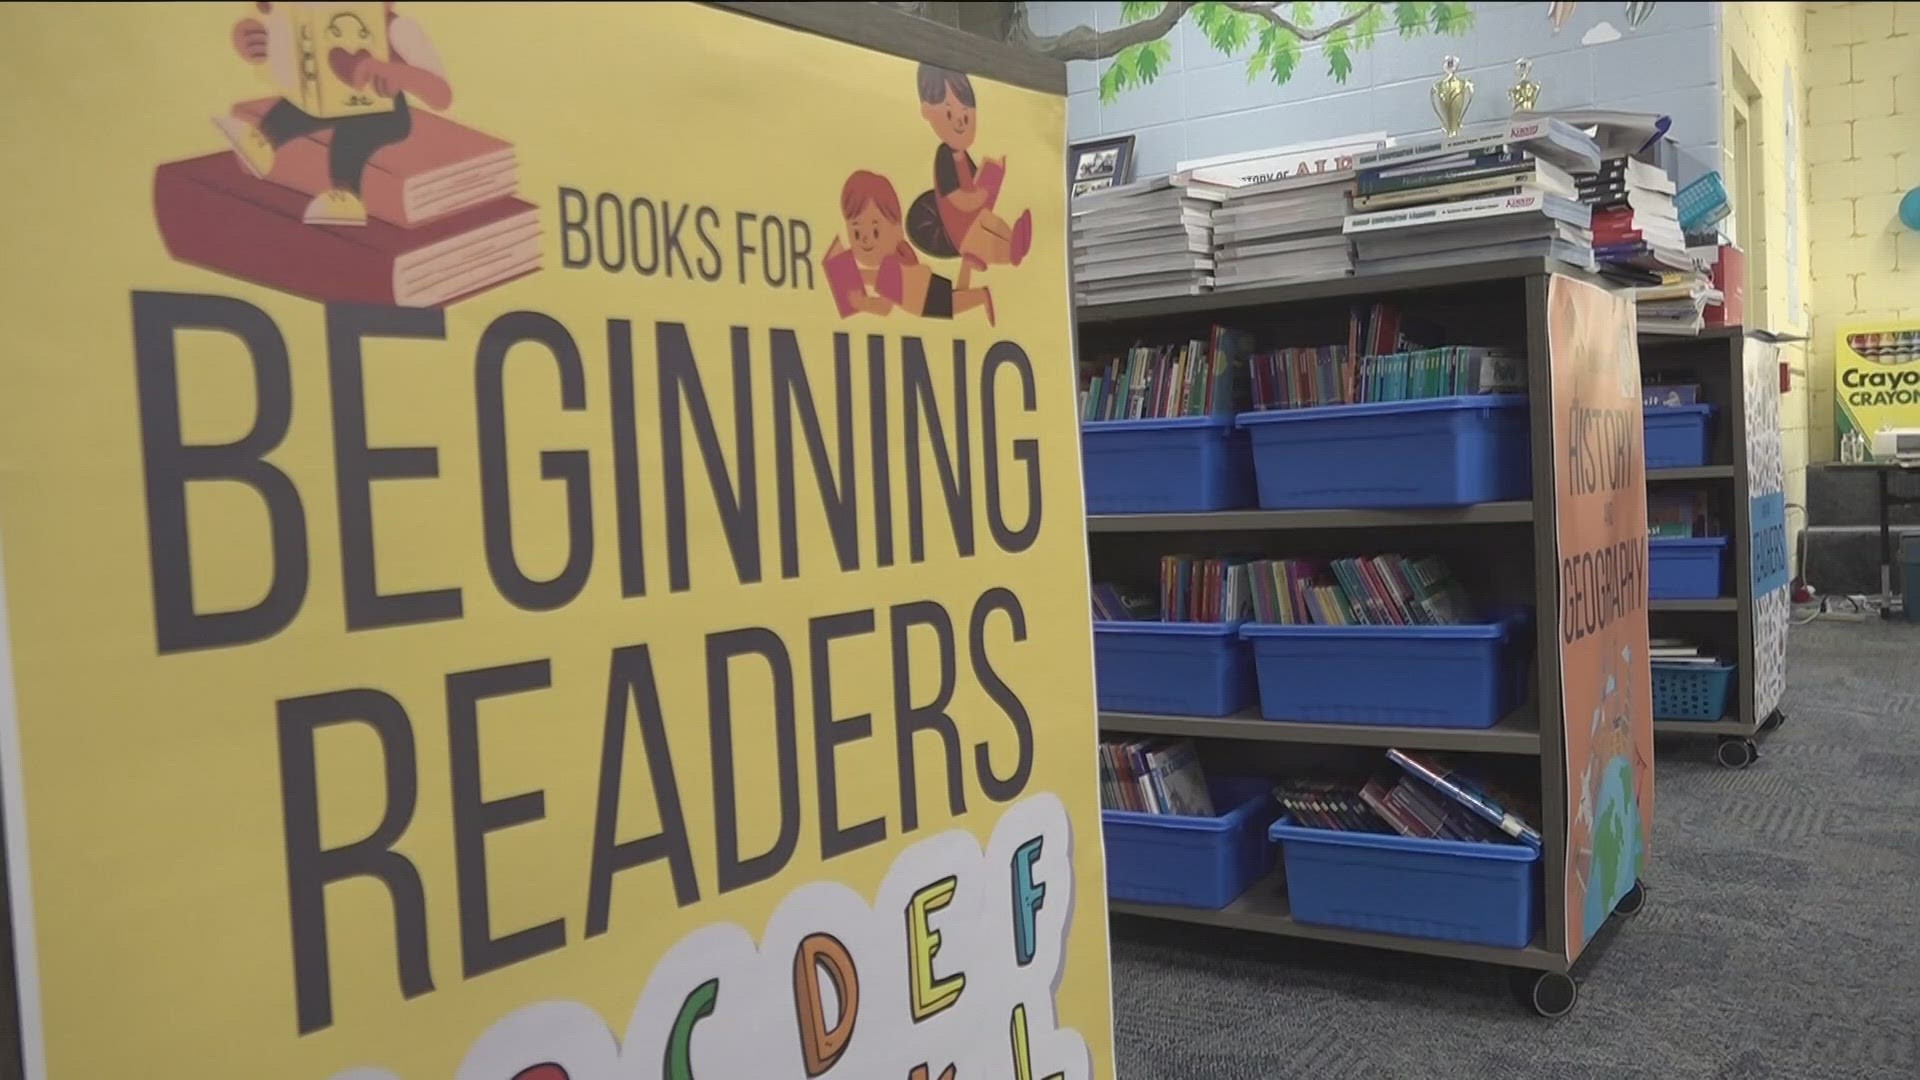 Teachers said the science of reading has made a significant difference for all students.